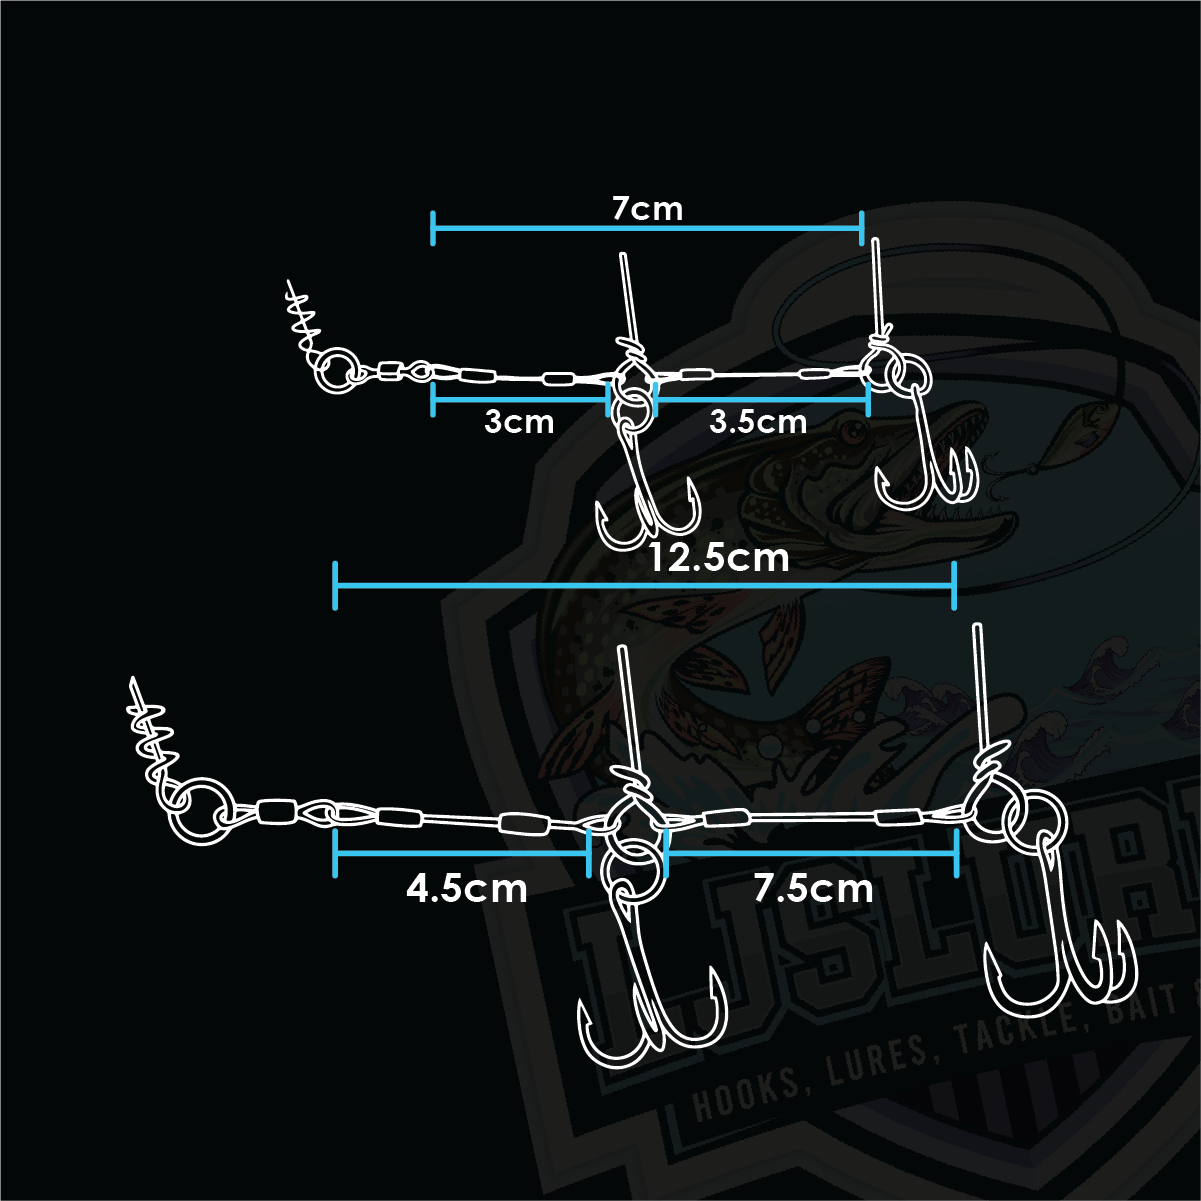 High Quality Screw In Stinger Rigs 7cm - 12.5cm - MORE COMING SOON!